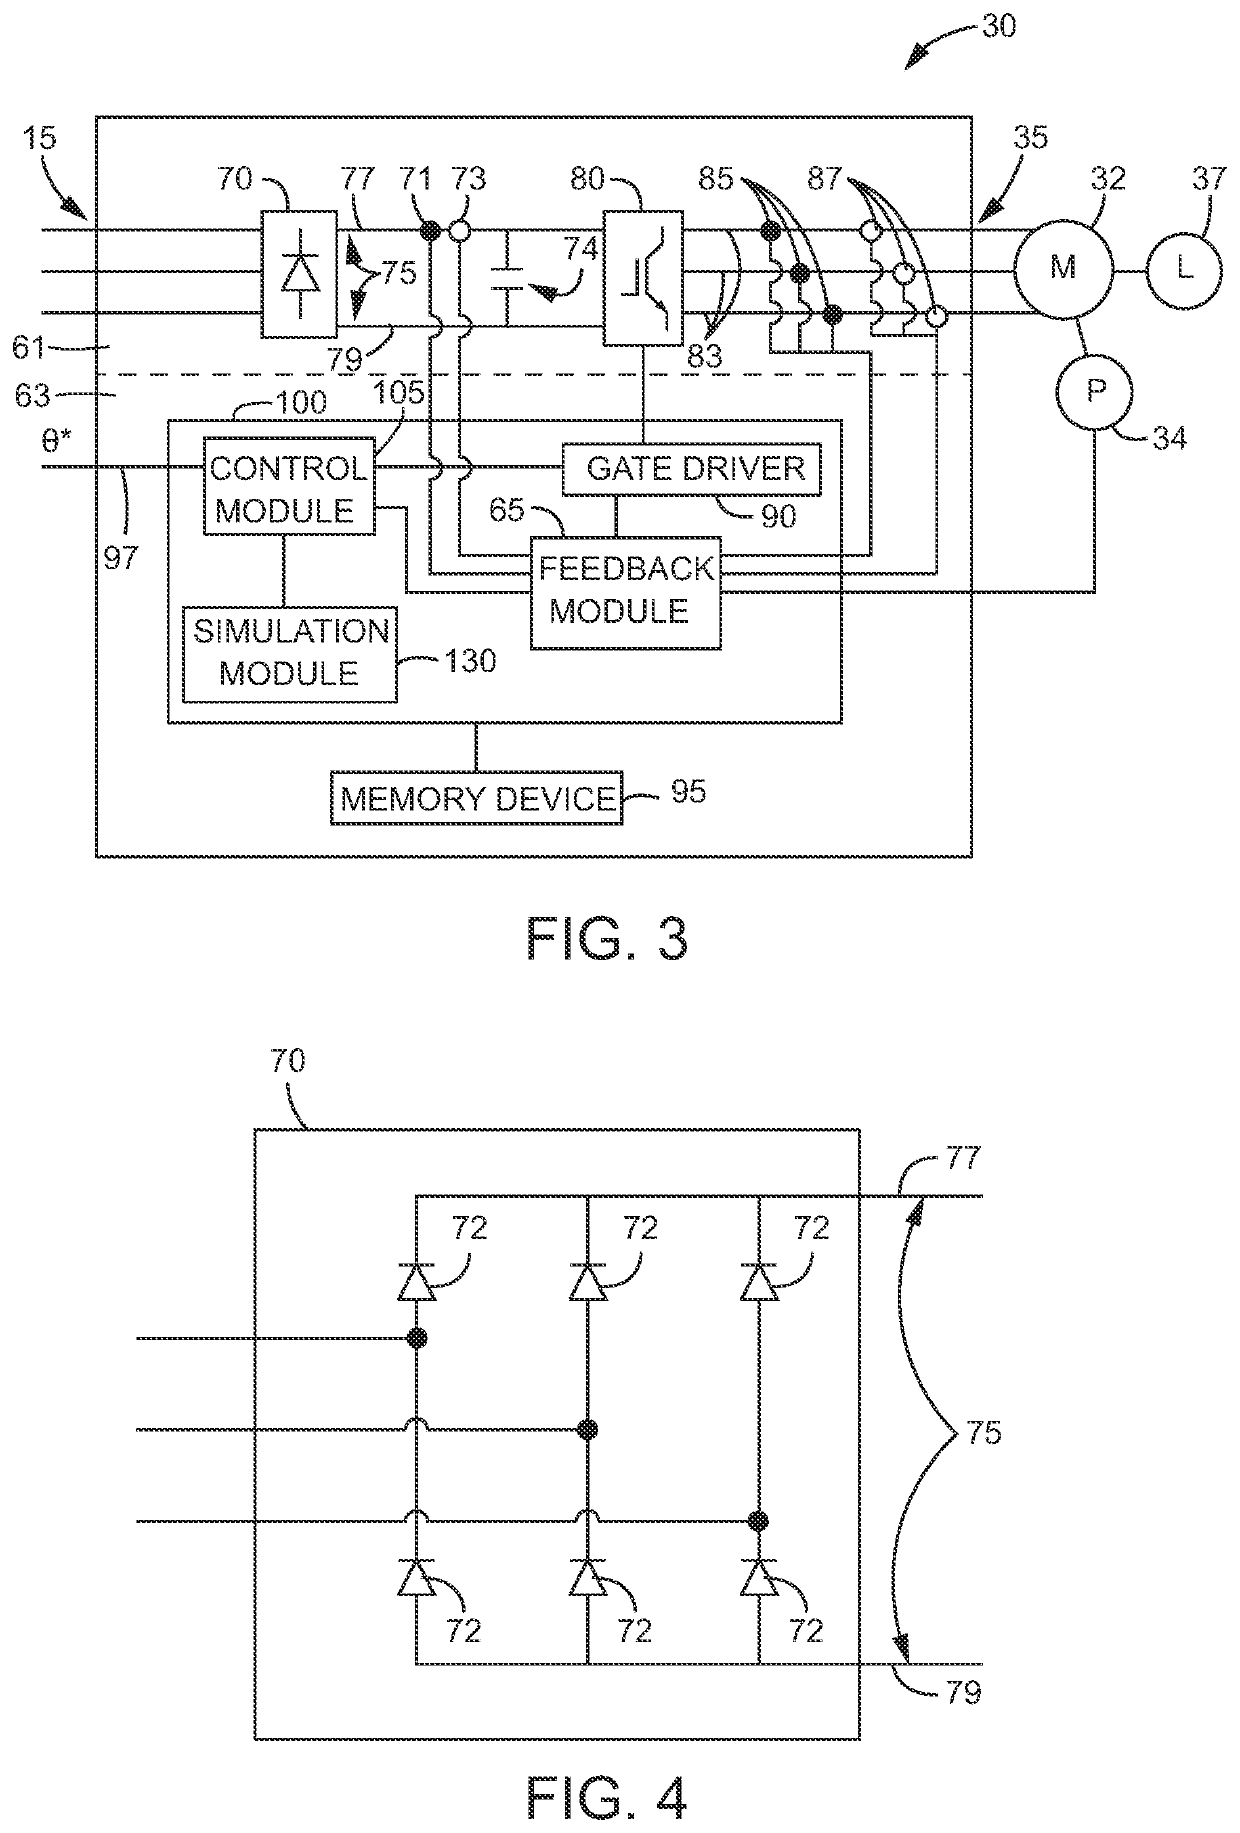 Method and apparatus for online simulation of complex motion systems